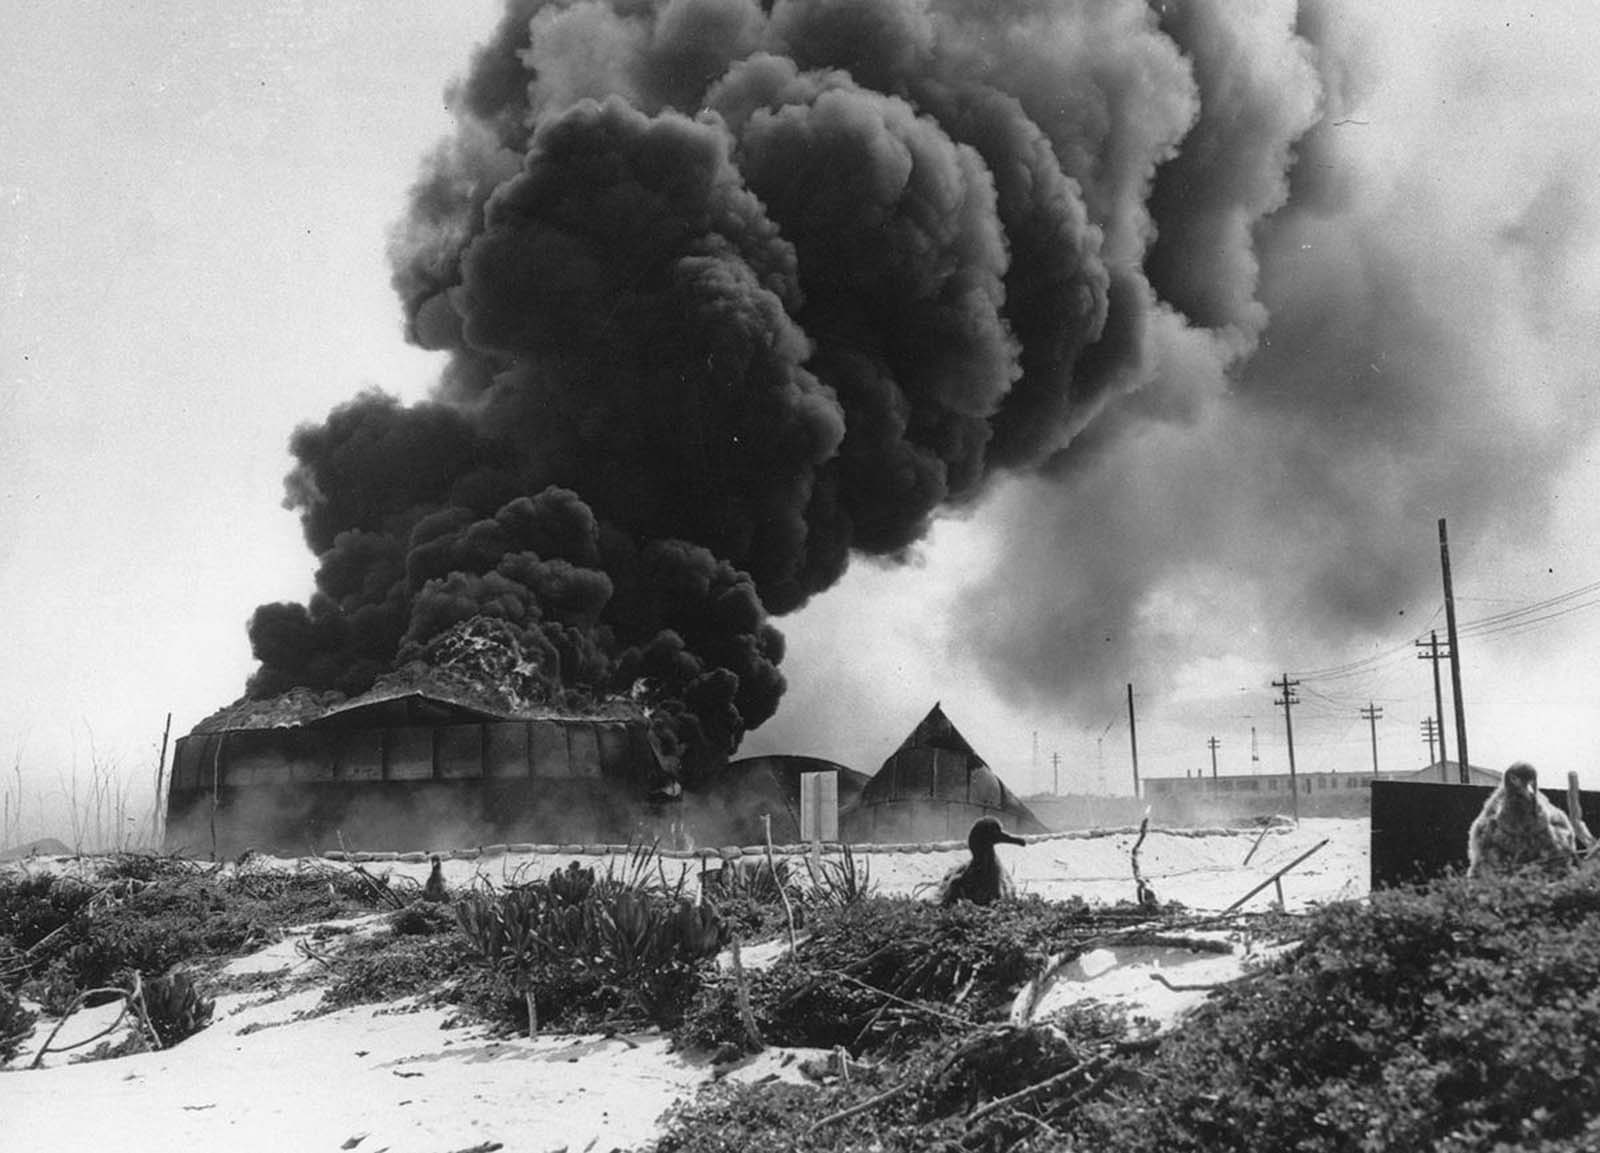 Black smoke rises from a burning U.S. oil tank, set afire during a Japanese air raid on Naval Air Station Midway on Midway Atoll, on June 4, 1942. American forces maintained an airstrip with dozens of aircraft stationed on the tiny island. The attack inflicted heavy damage, but the airstrip was still usable.